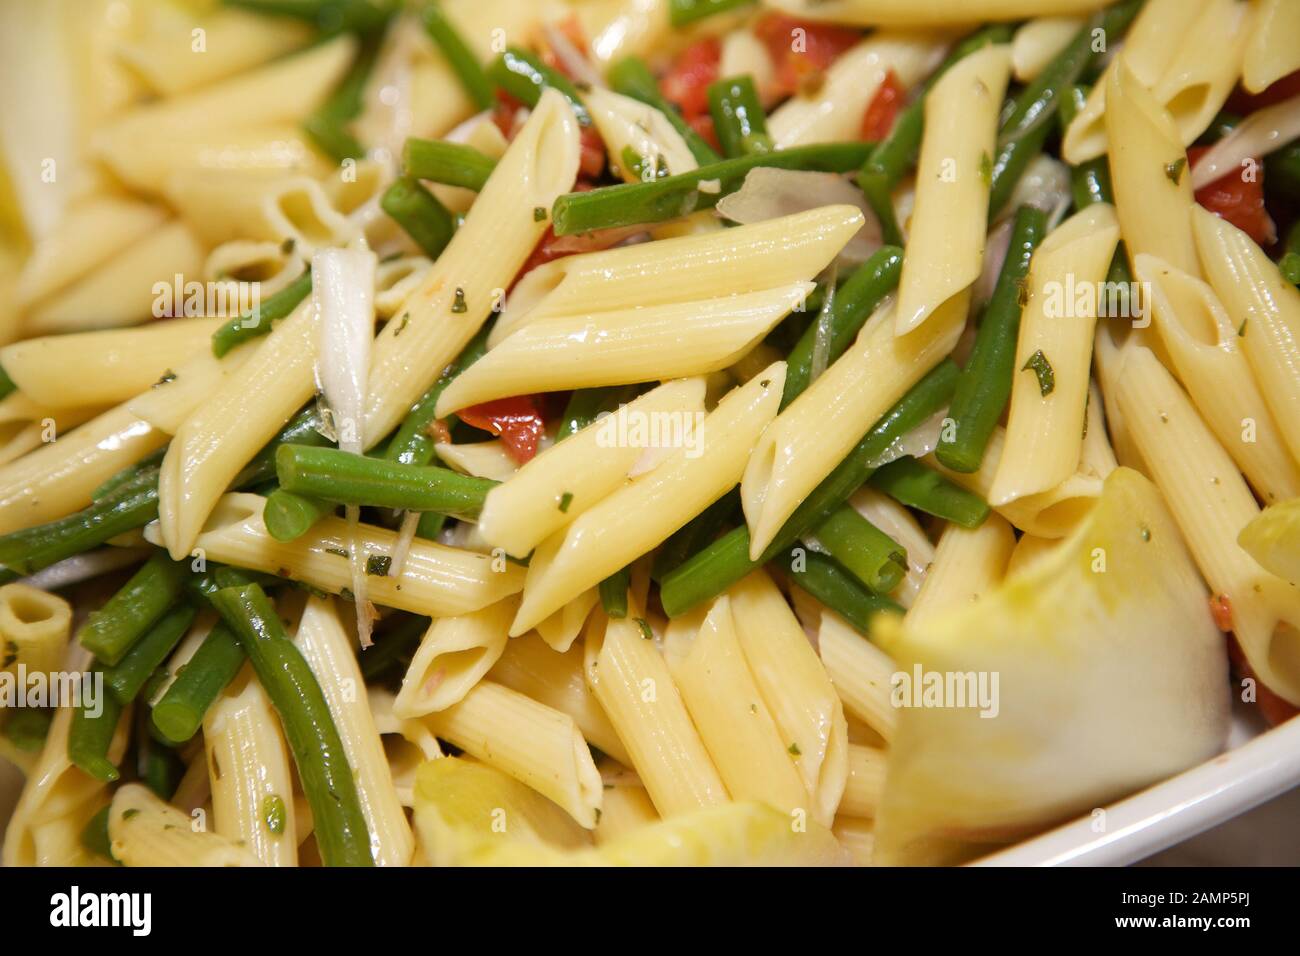 Freshly cooked penne pasta with green beans and tomatoes. Stock Photo